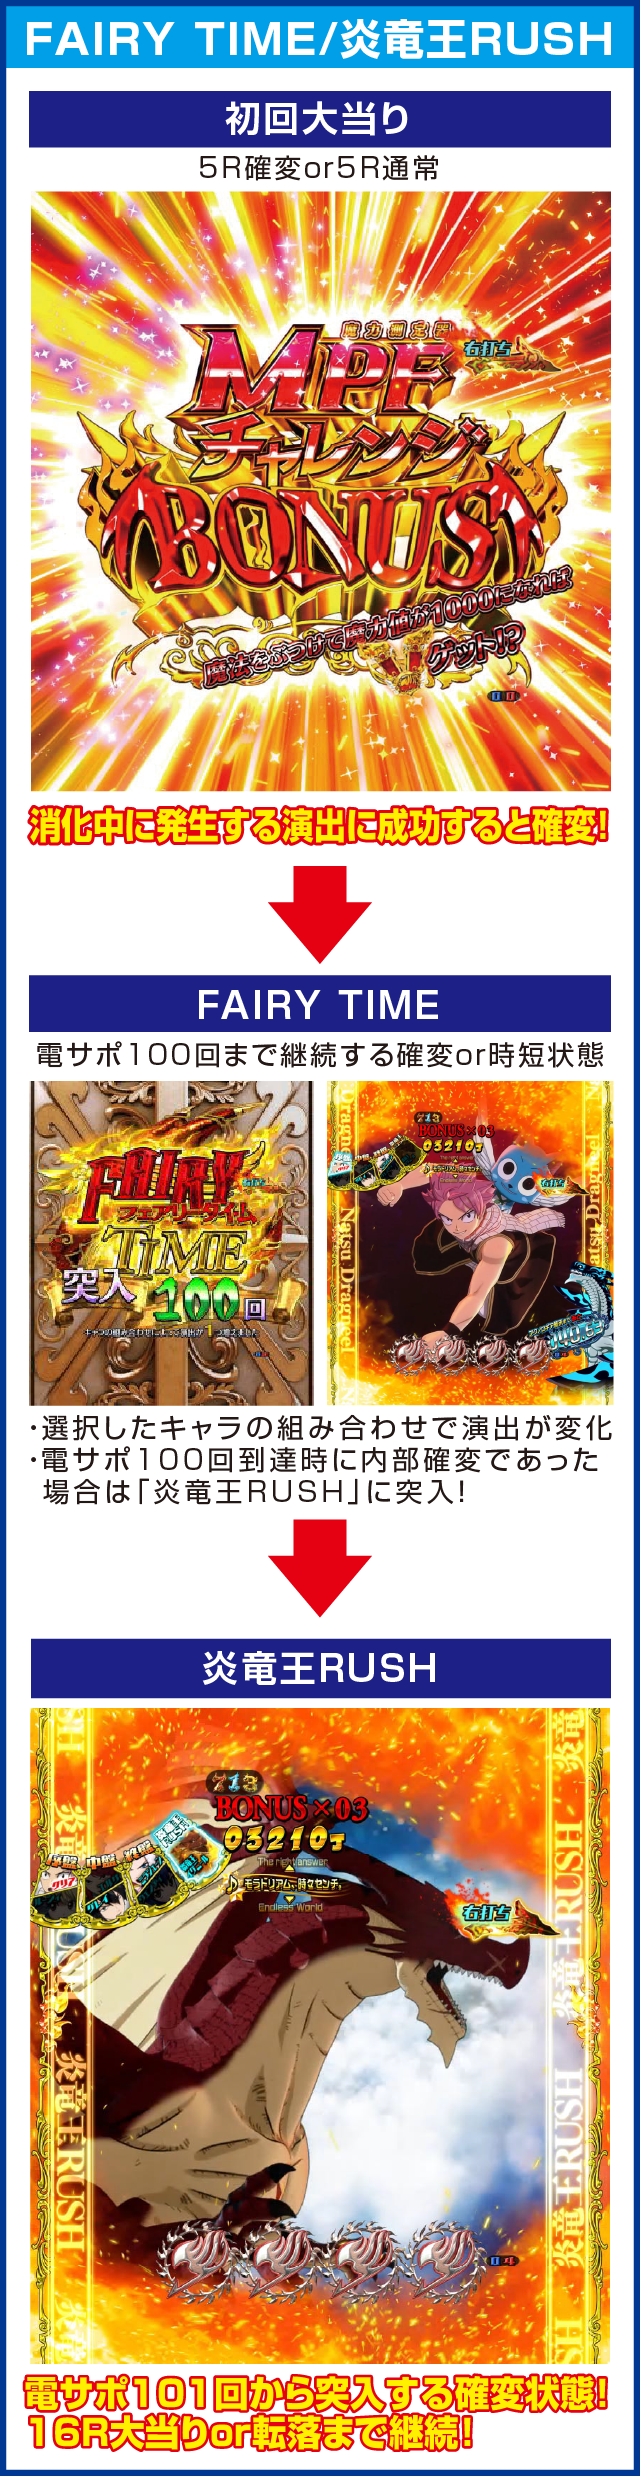 CR FAIRY TAILのピックアップポイント